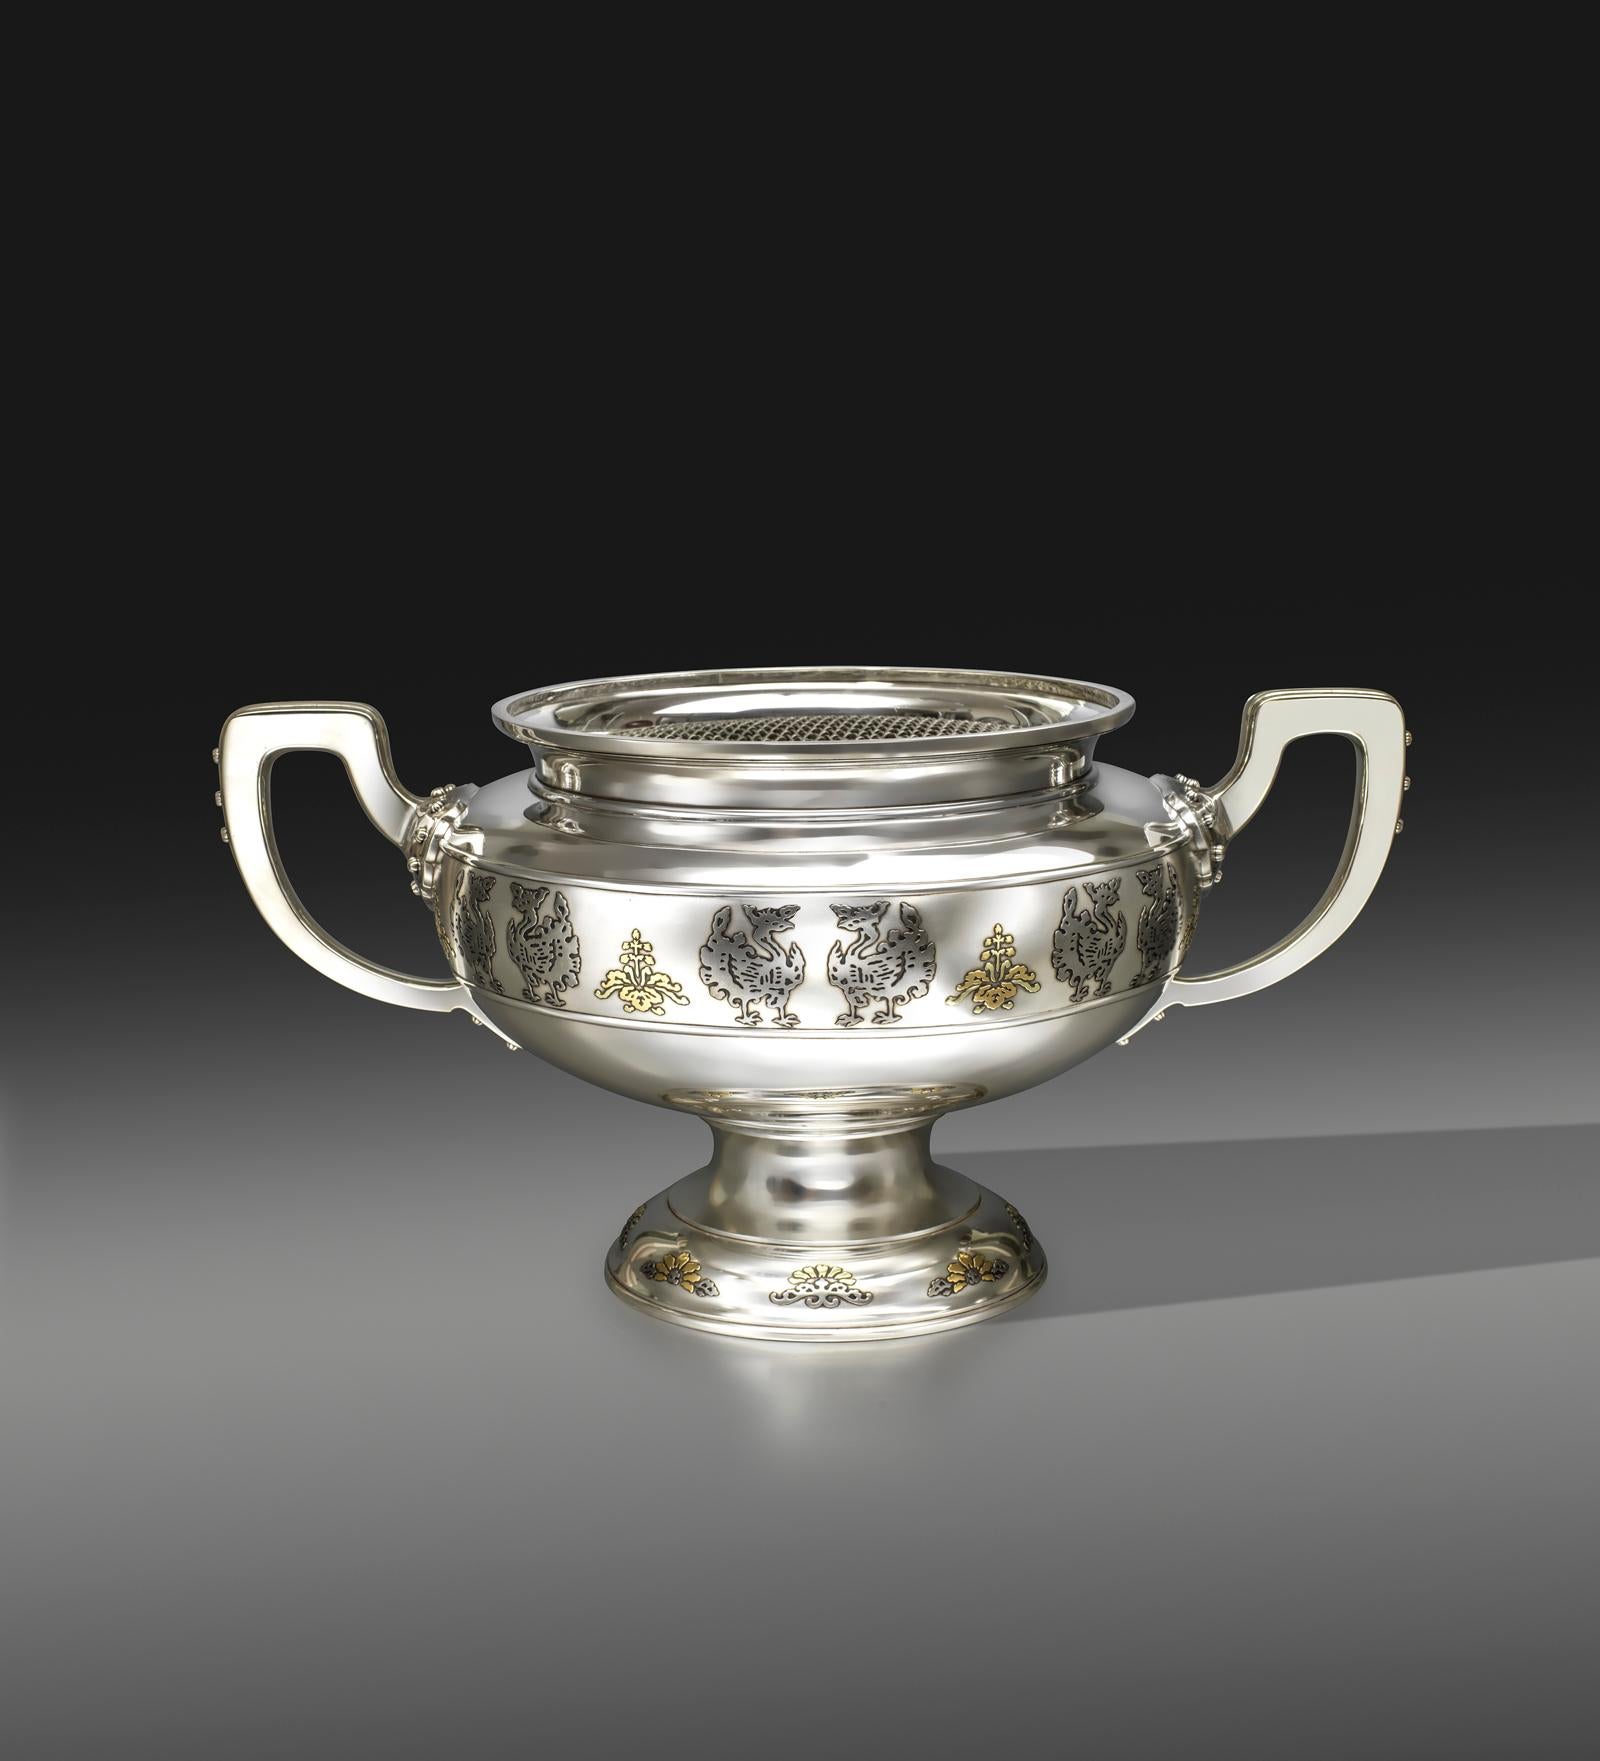 As part of our Japanese works of art collection we are delighted to offer this large and stylish Meiji Period 1868-1912, circa 1900 solid silver and mixed metal bowl by the renowned Miyamoto company, this significant scale vessel weighs over 172